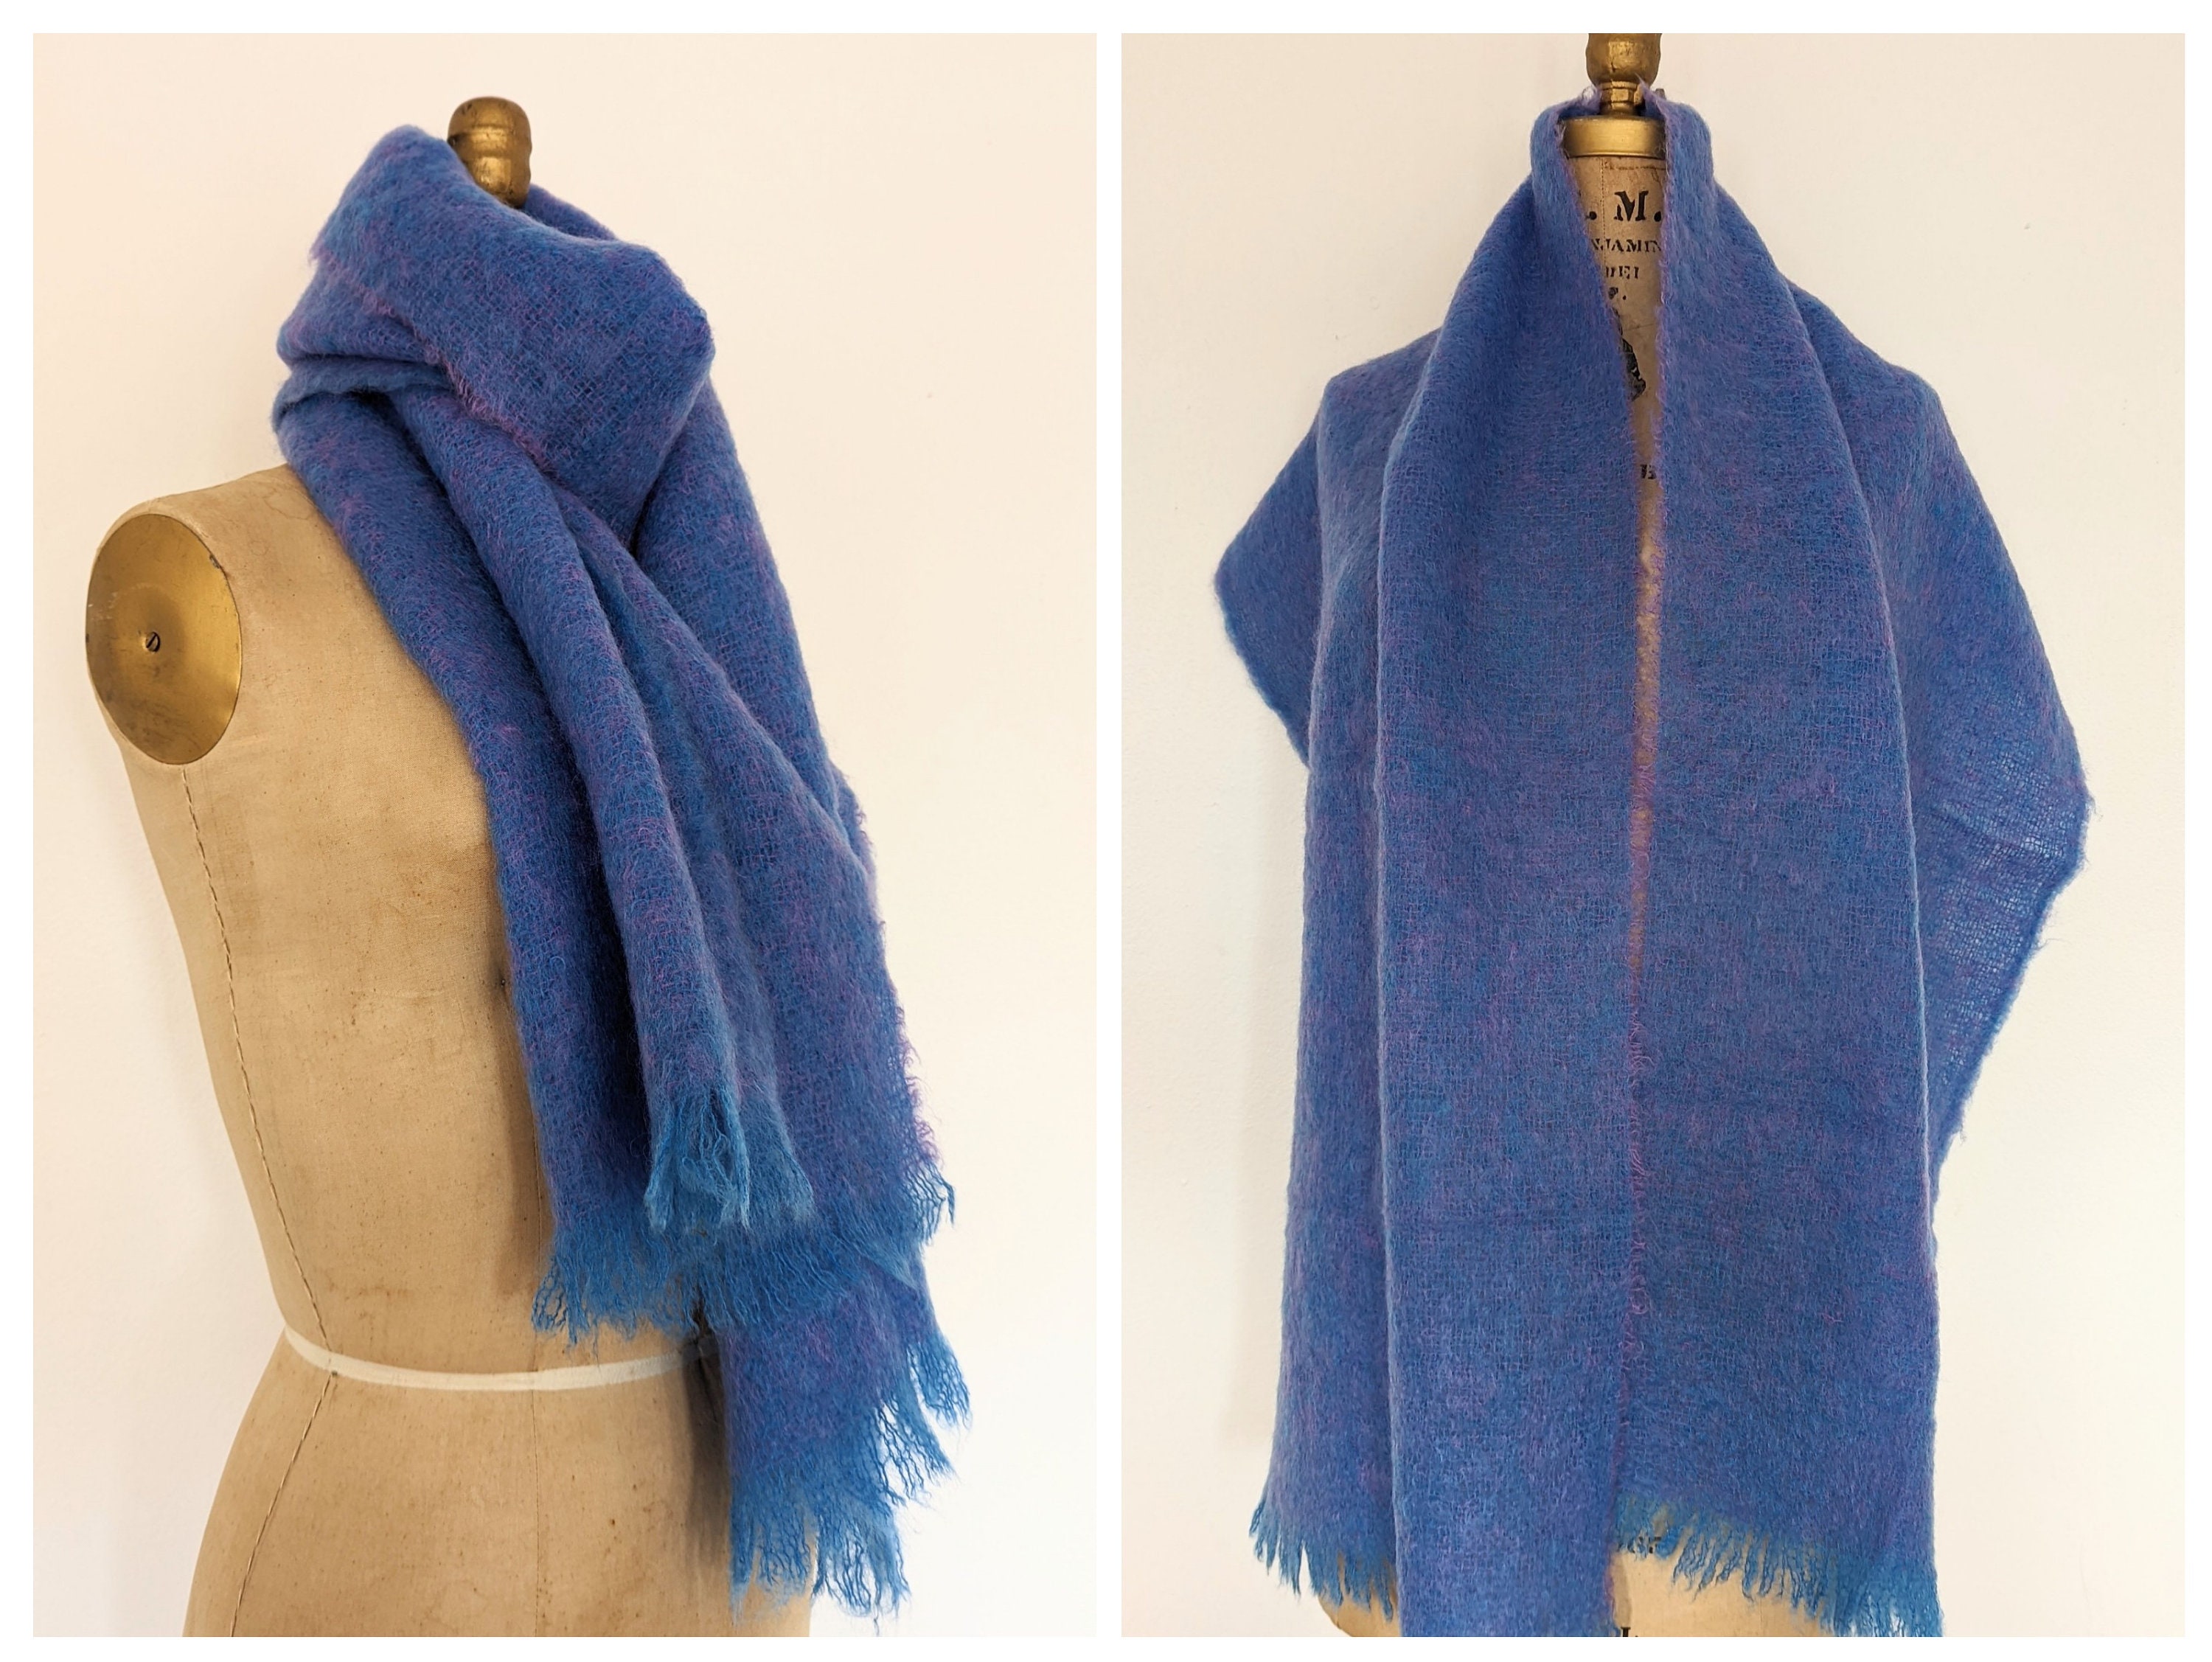 Oversized Scarf Beige, Light Brown and Off-White Wool and Mohair Blend